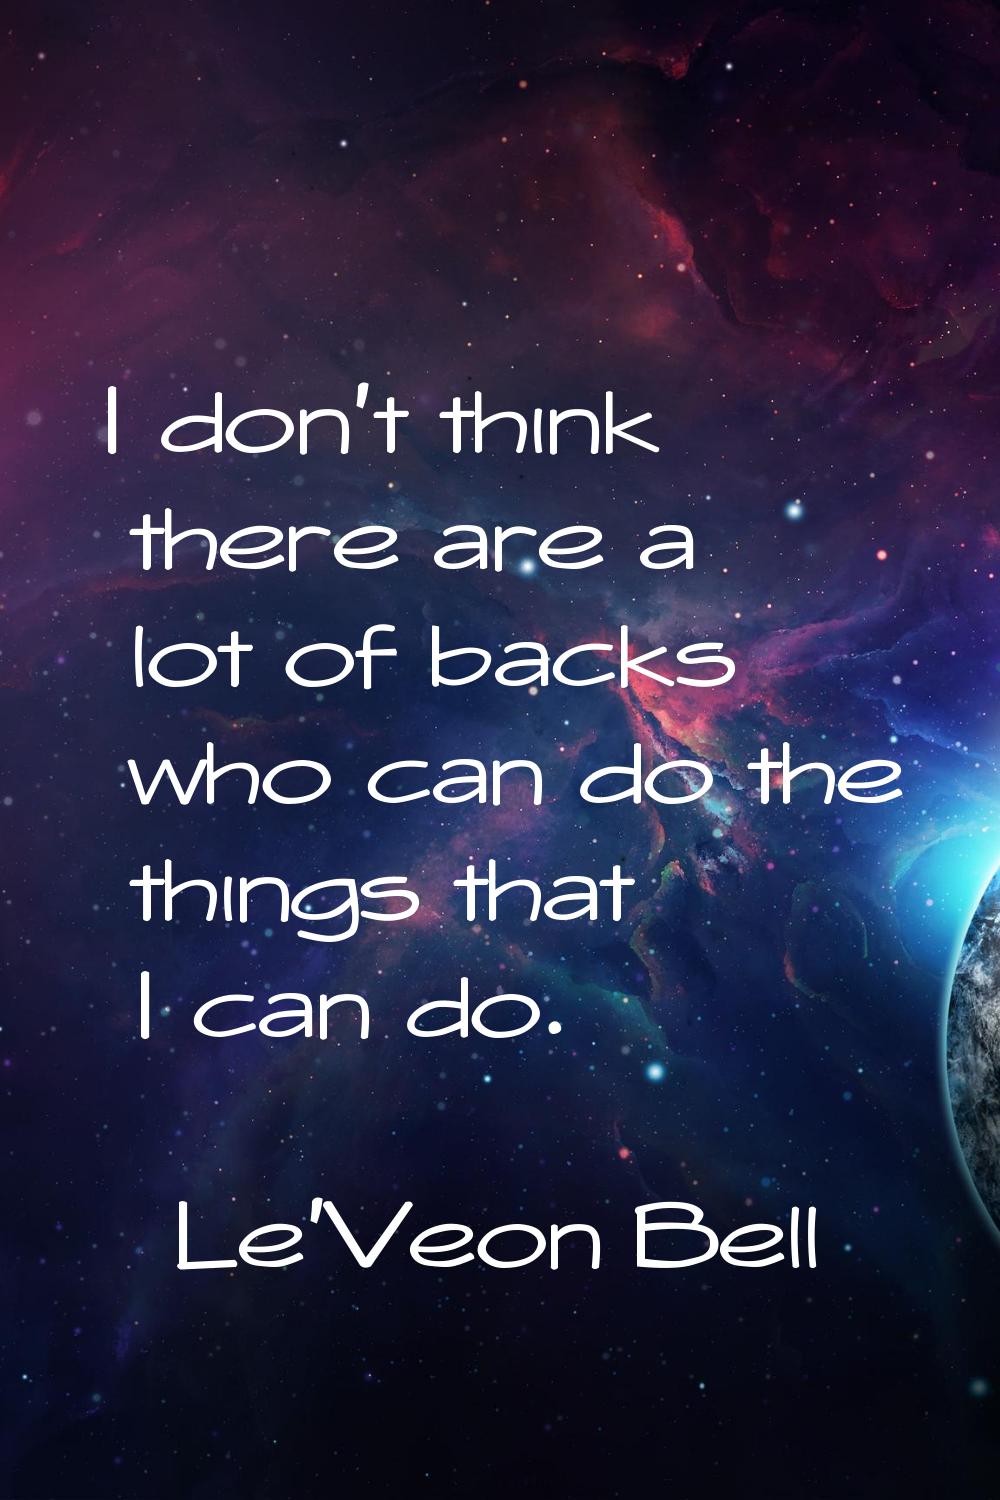 I don't think there are a lot of backs who can do the things that I can do.